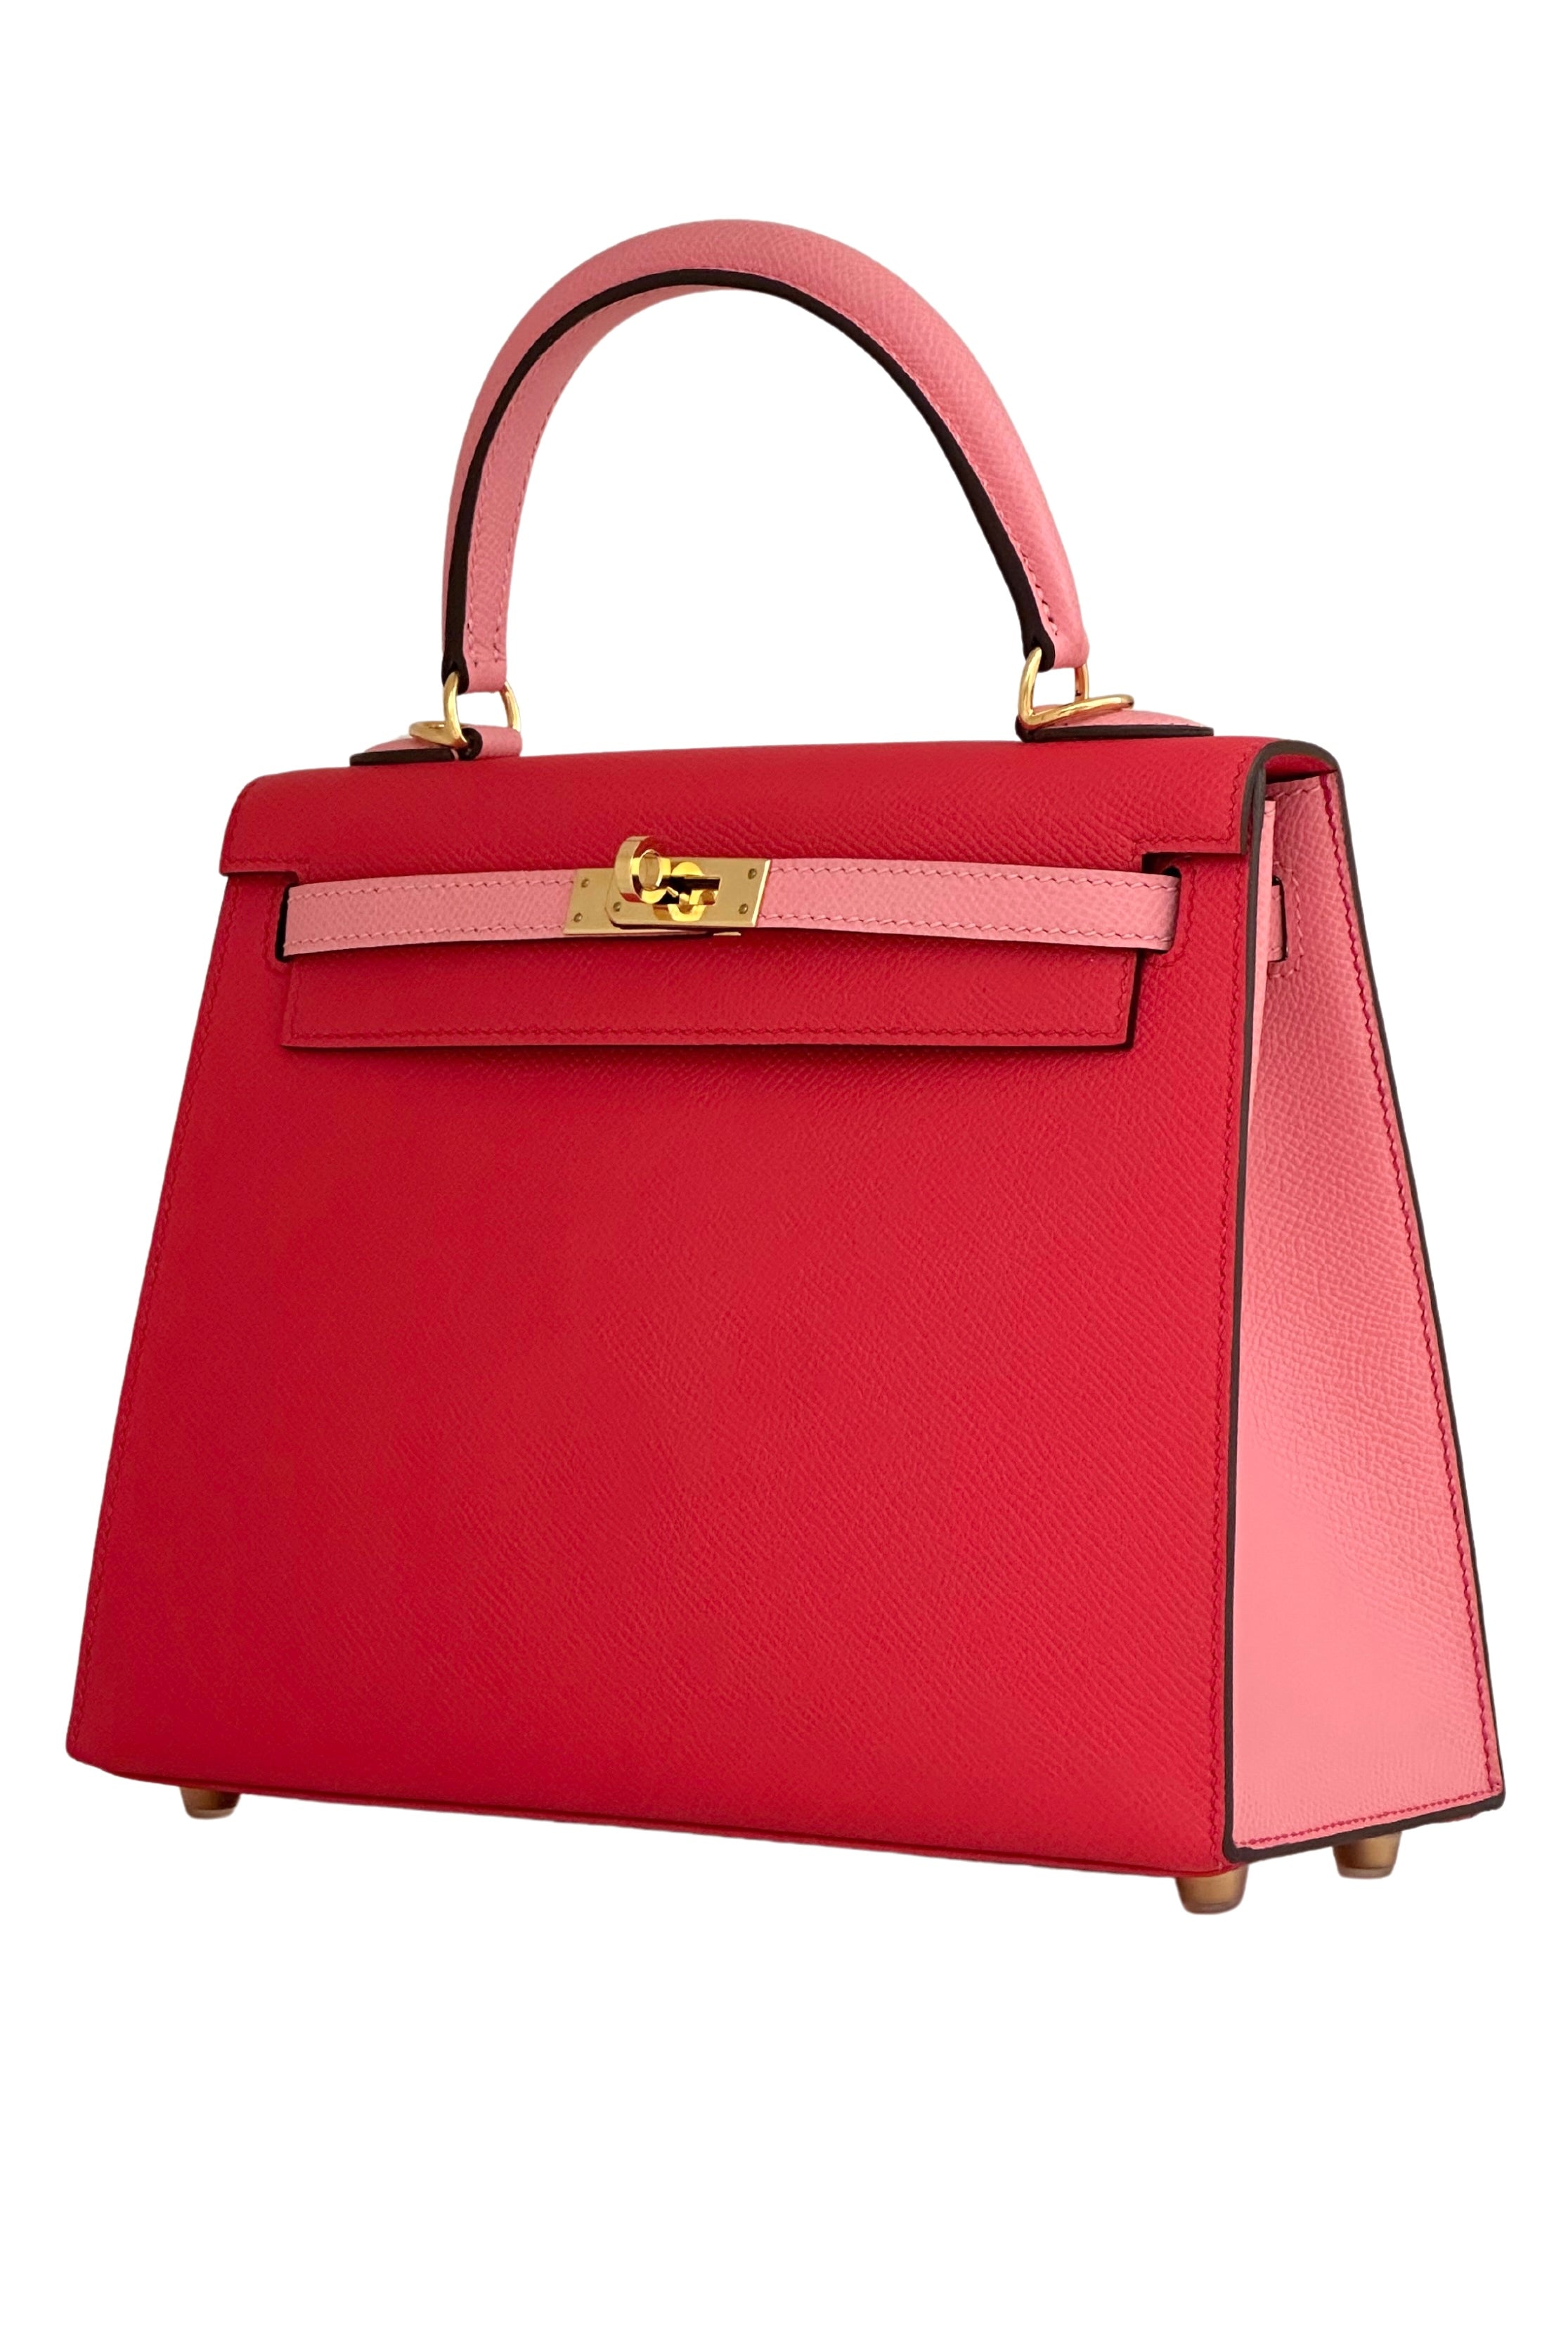 Hermès Paris <br> 2021 Custom Kelly 25 in two tone Epsom leather with Gold hardware & Horseshoe stamp